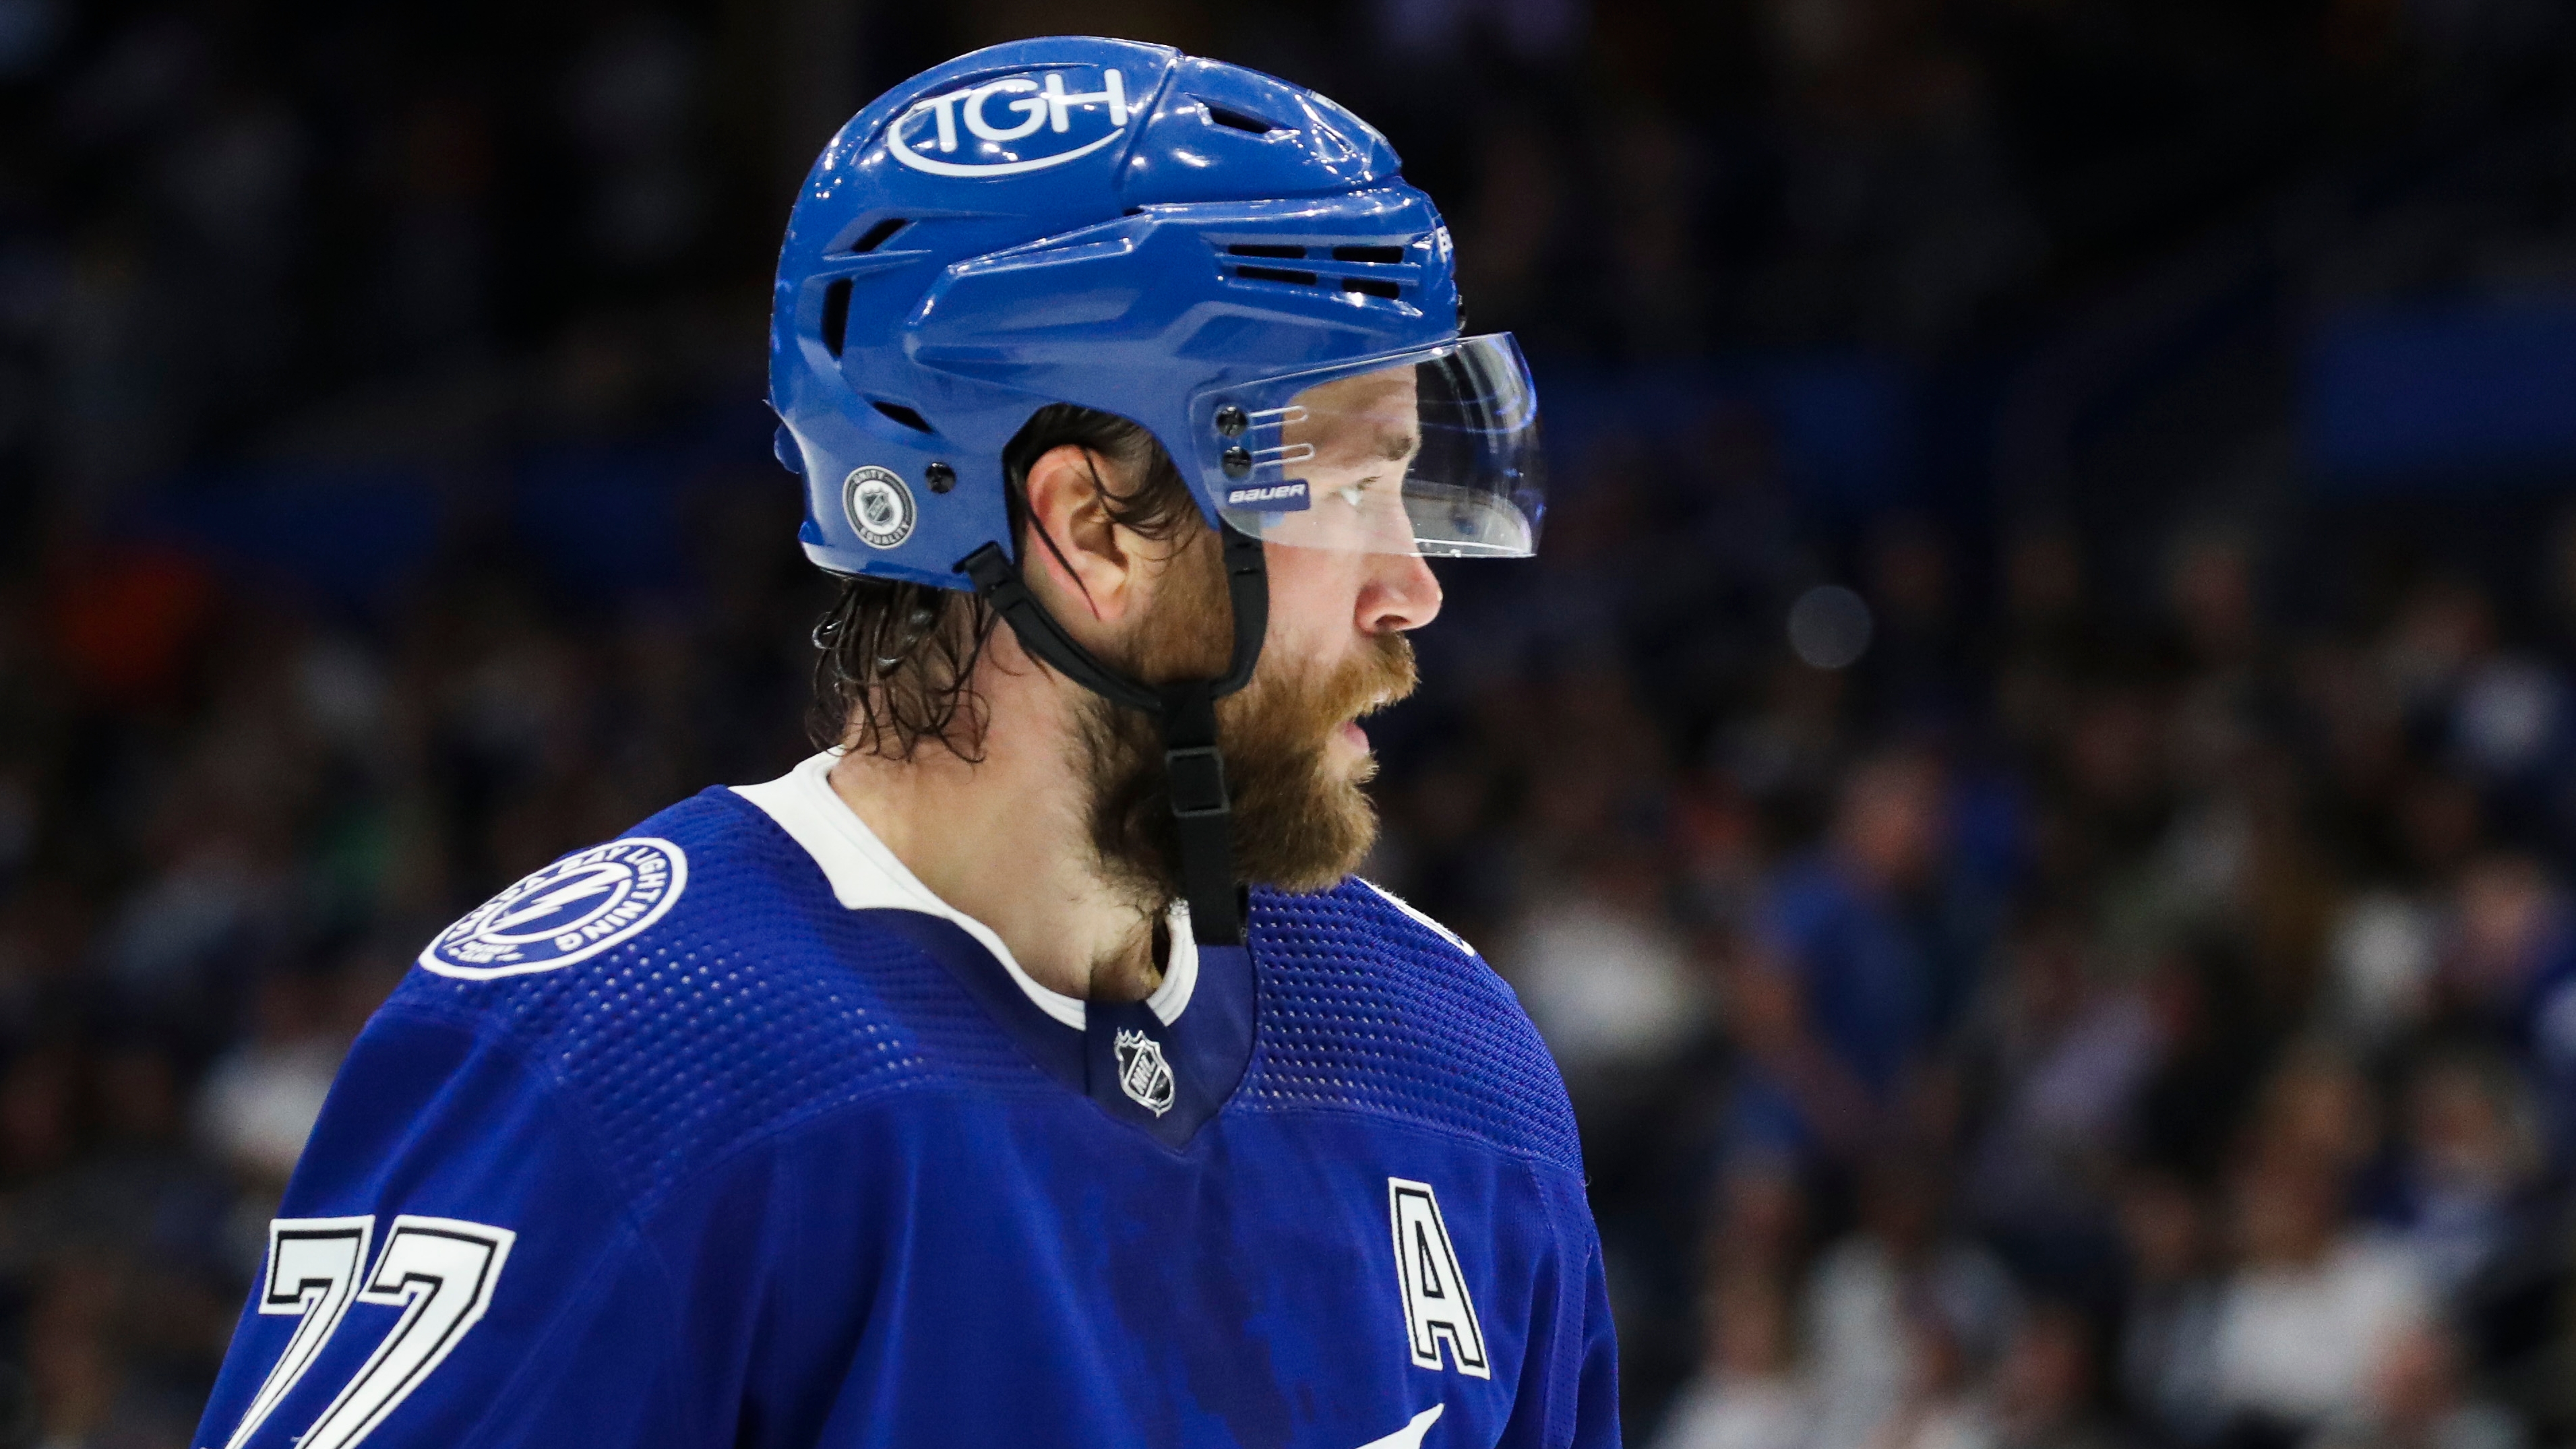 Victor Hedman suffers scary injury after his visor breaks during World  Championship game